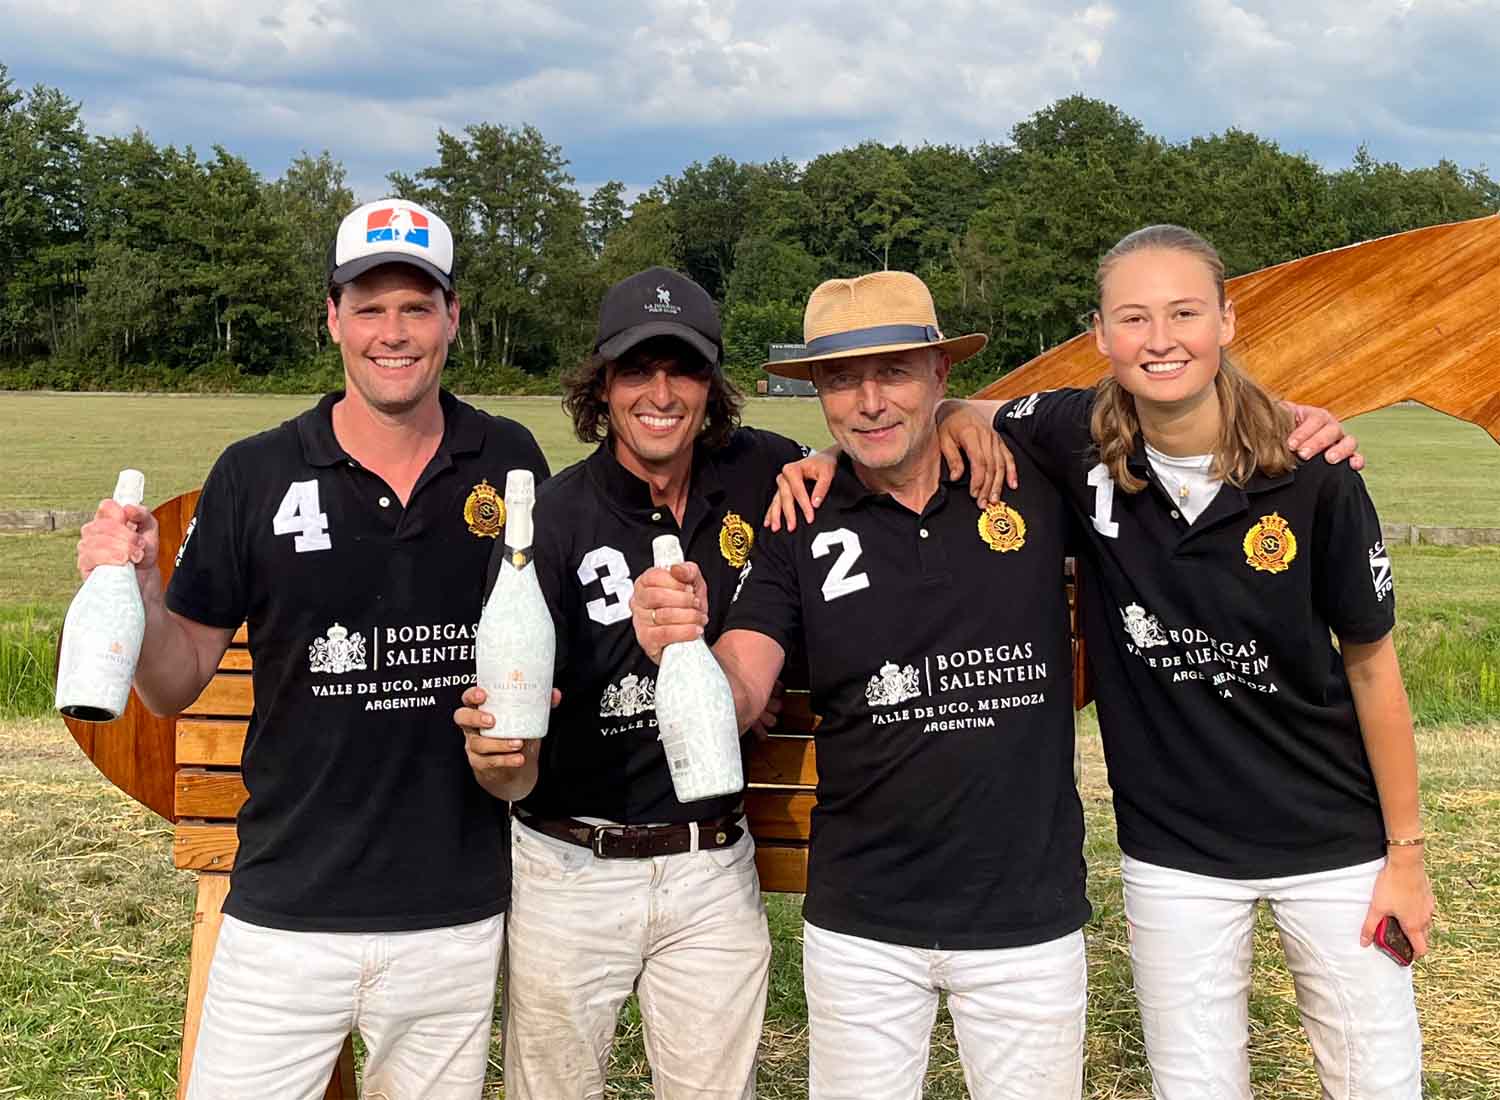 PCM polo team wins the ARGENTINE POLO DAYS CUP 2022 !